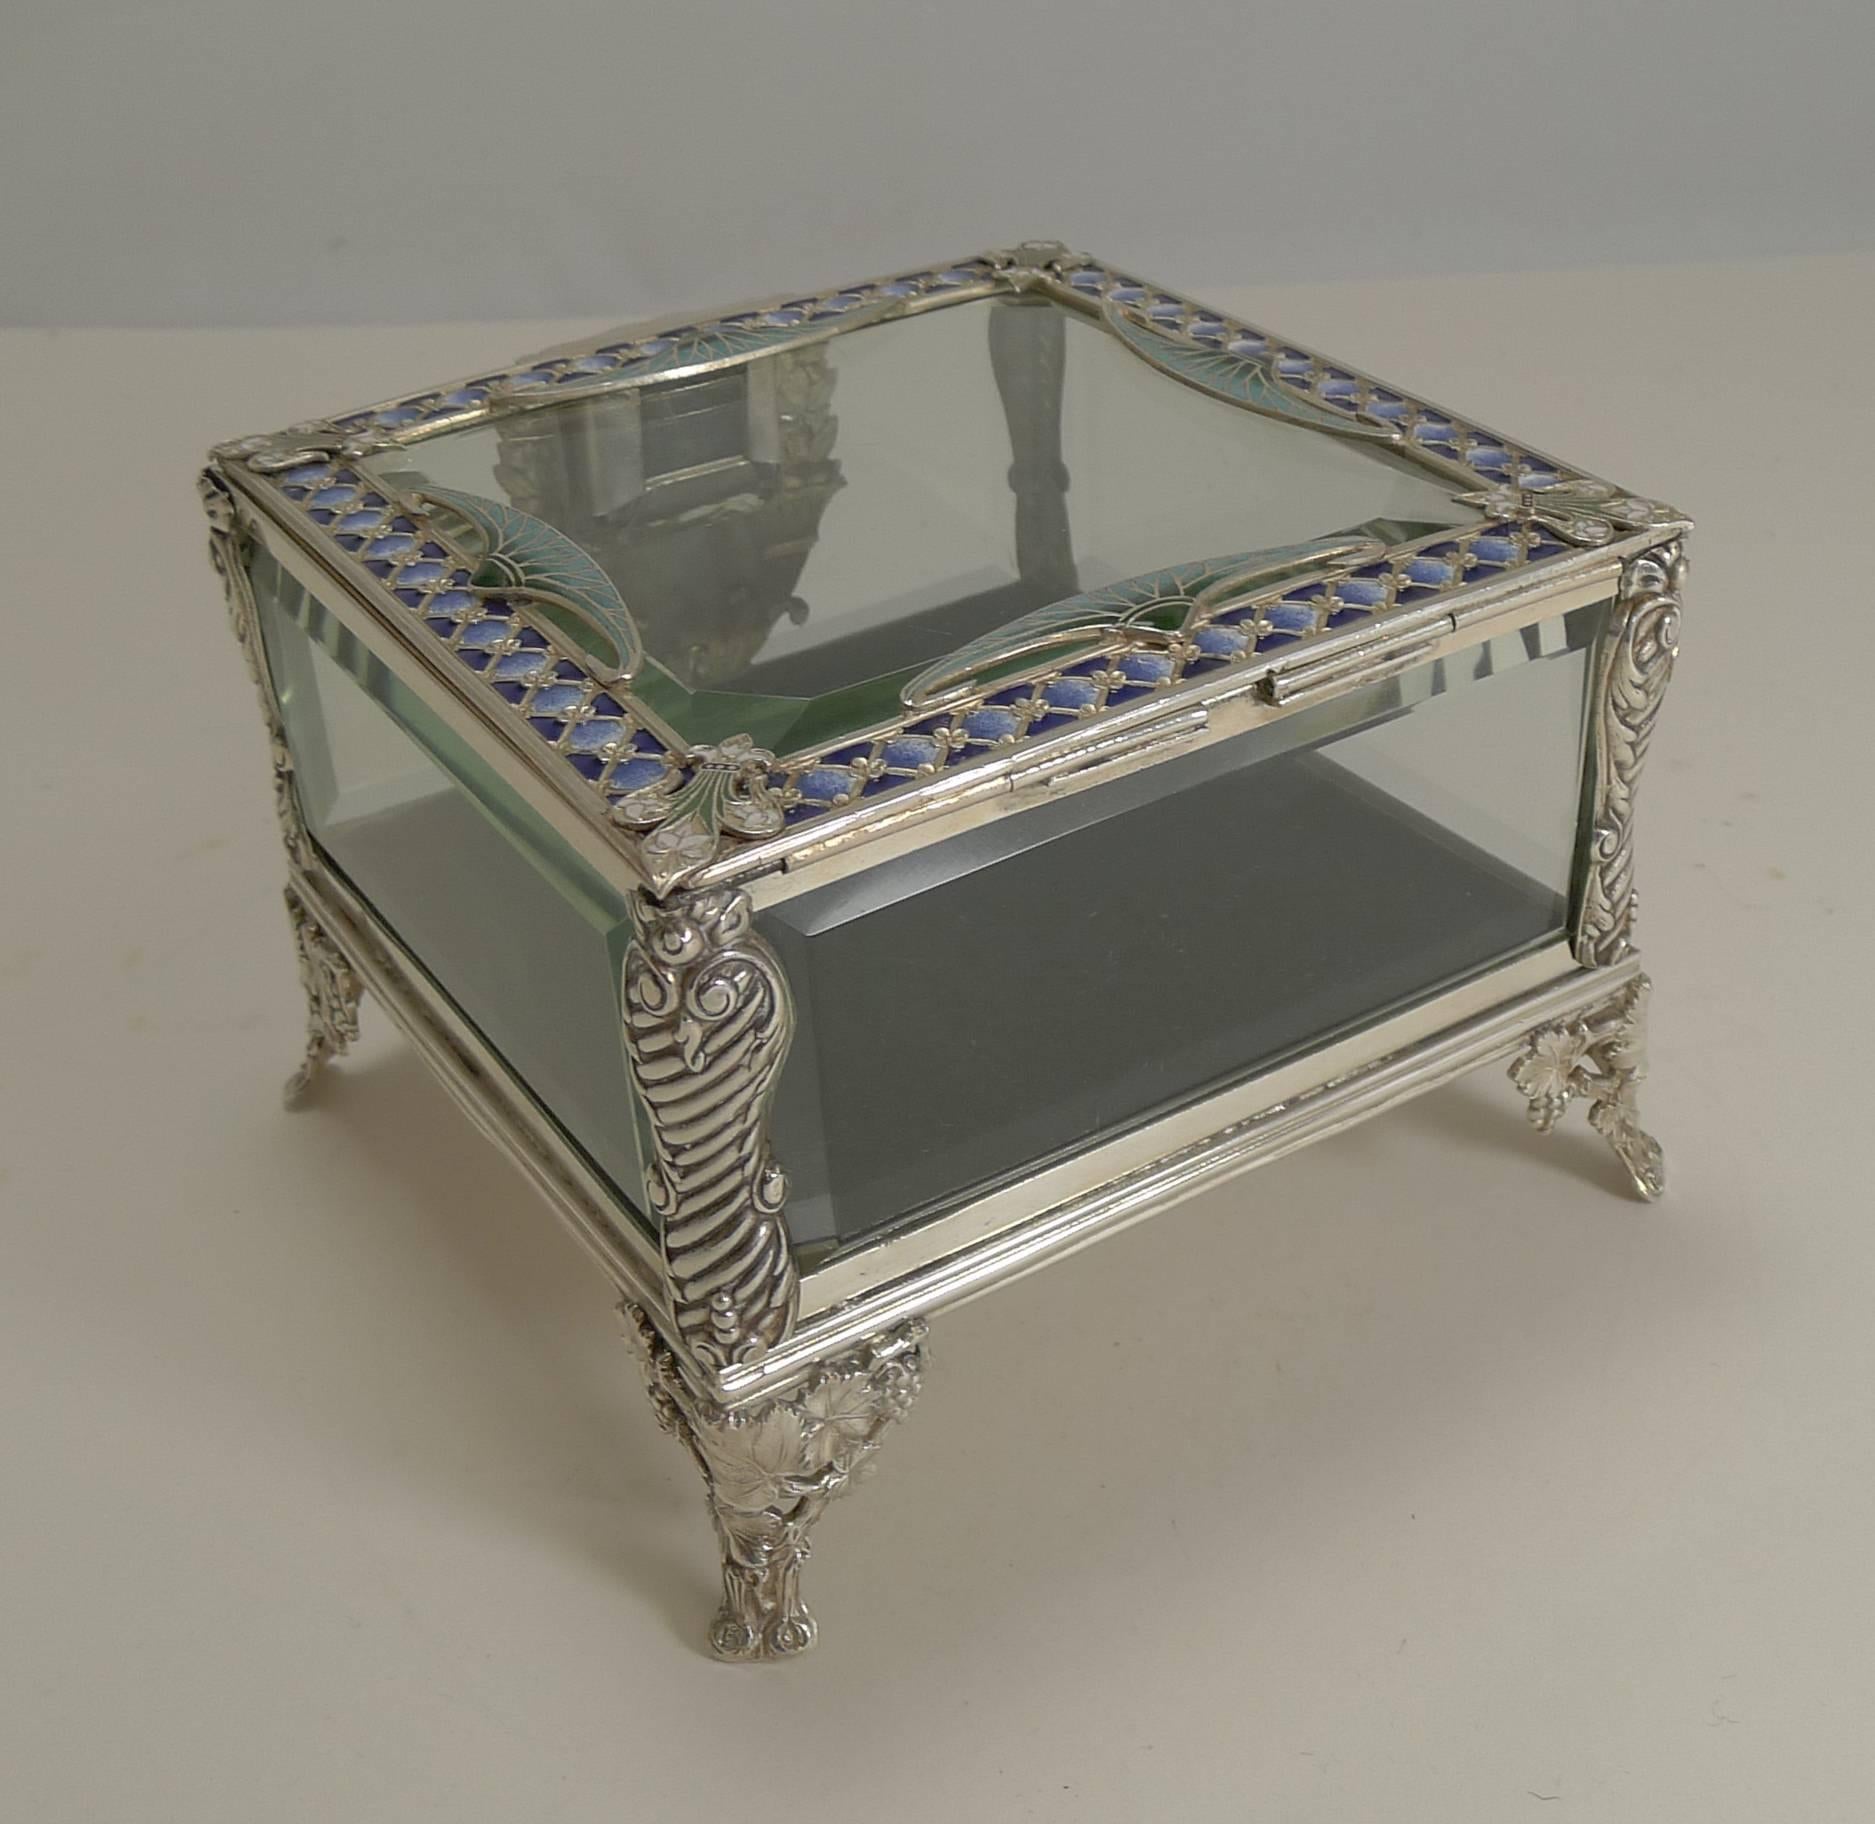 20th Century French Art Nouveau Silver Plate and Enamel Jewelry Box, circa 1900